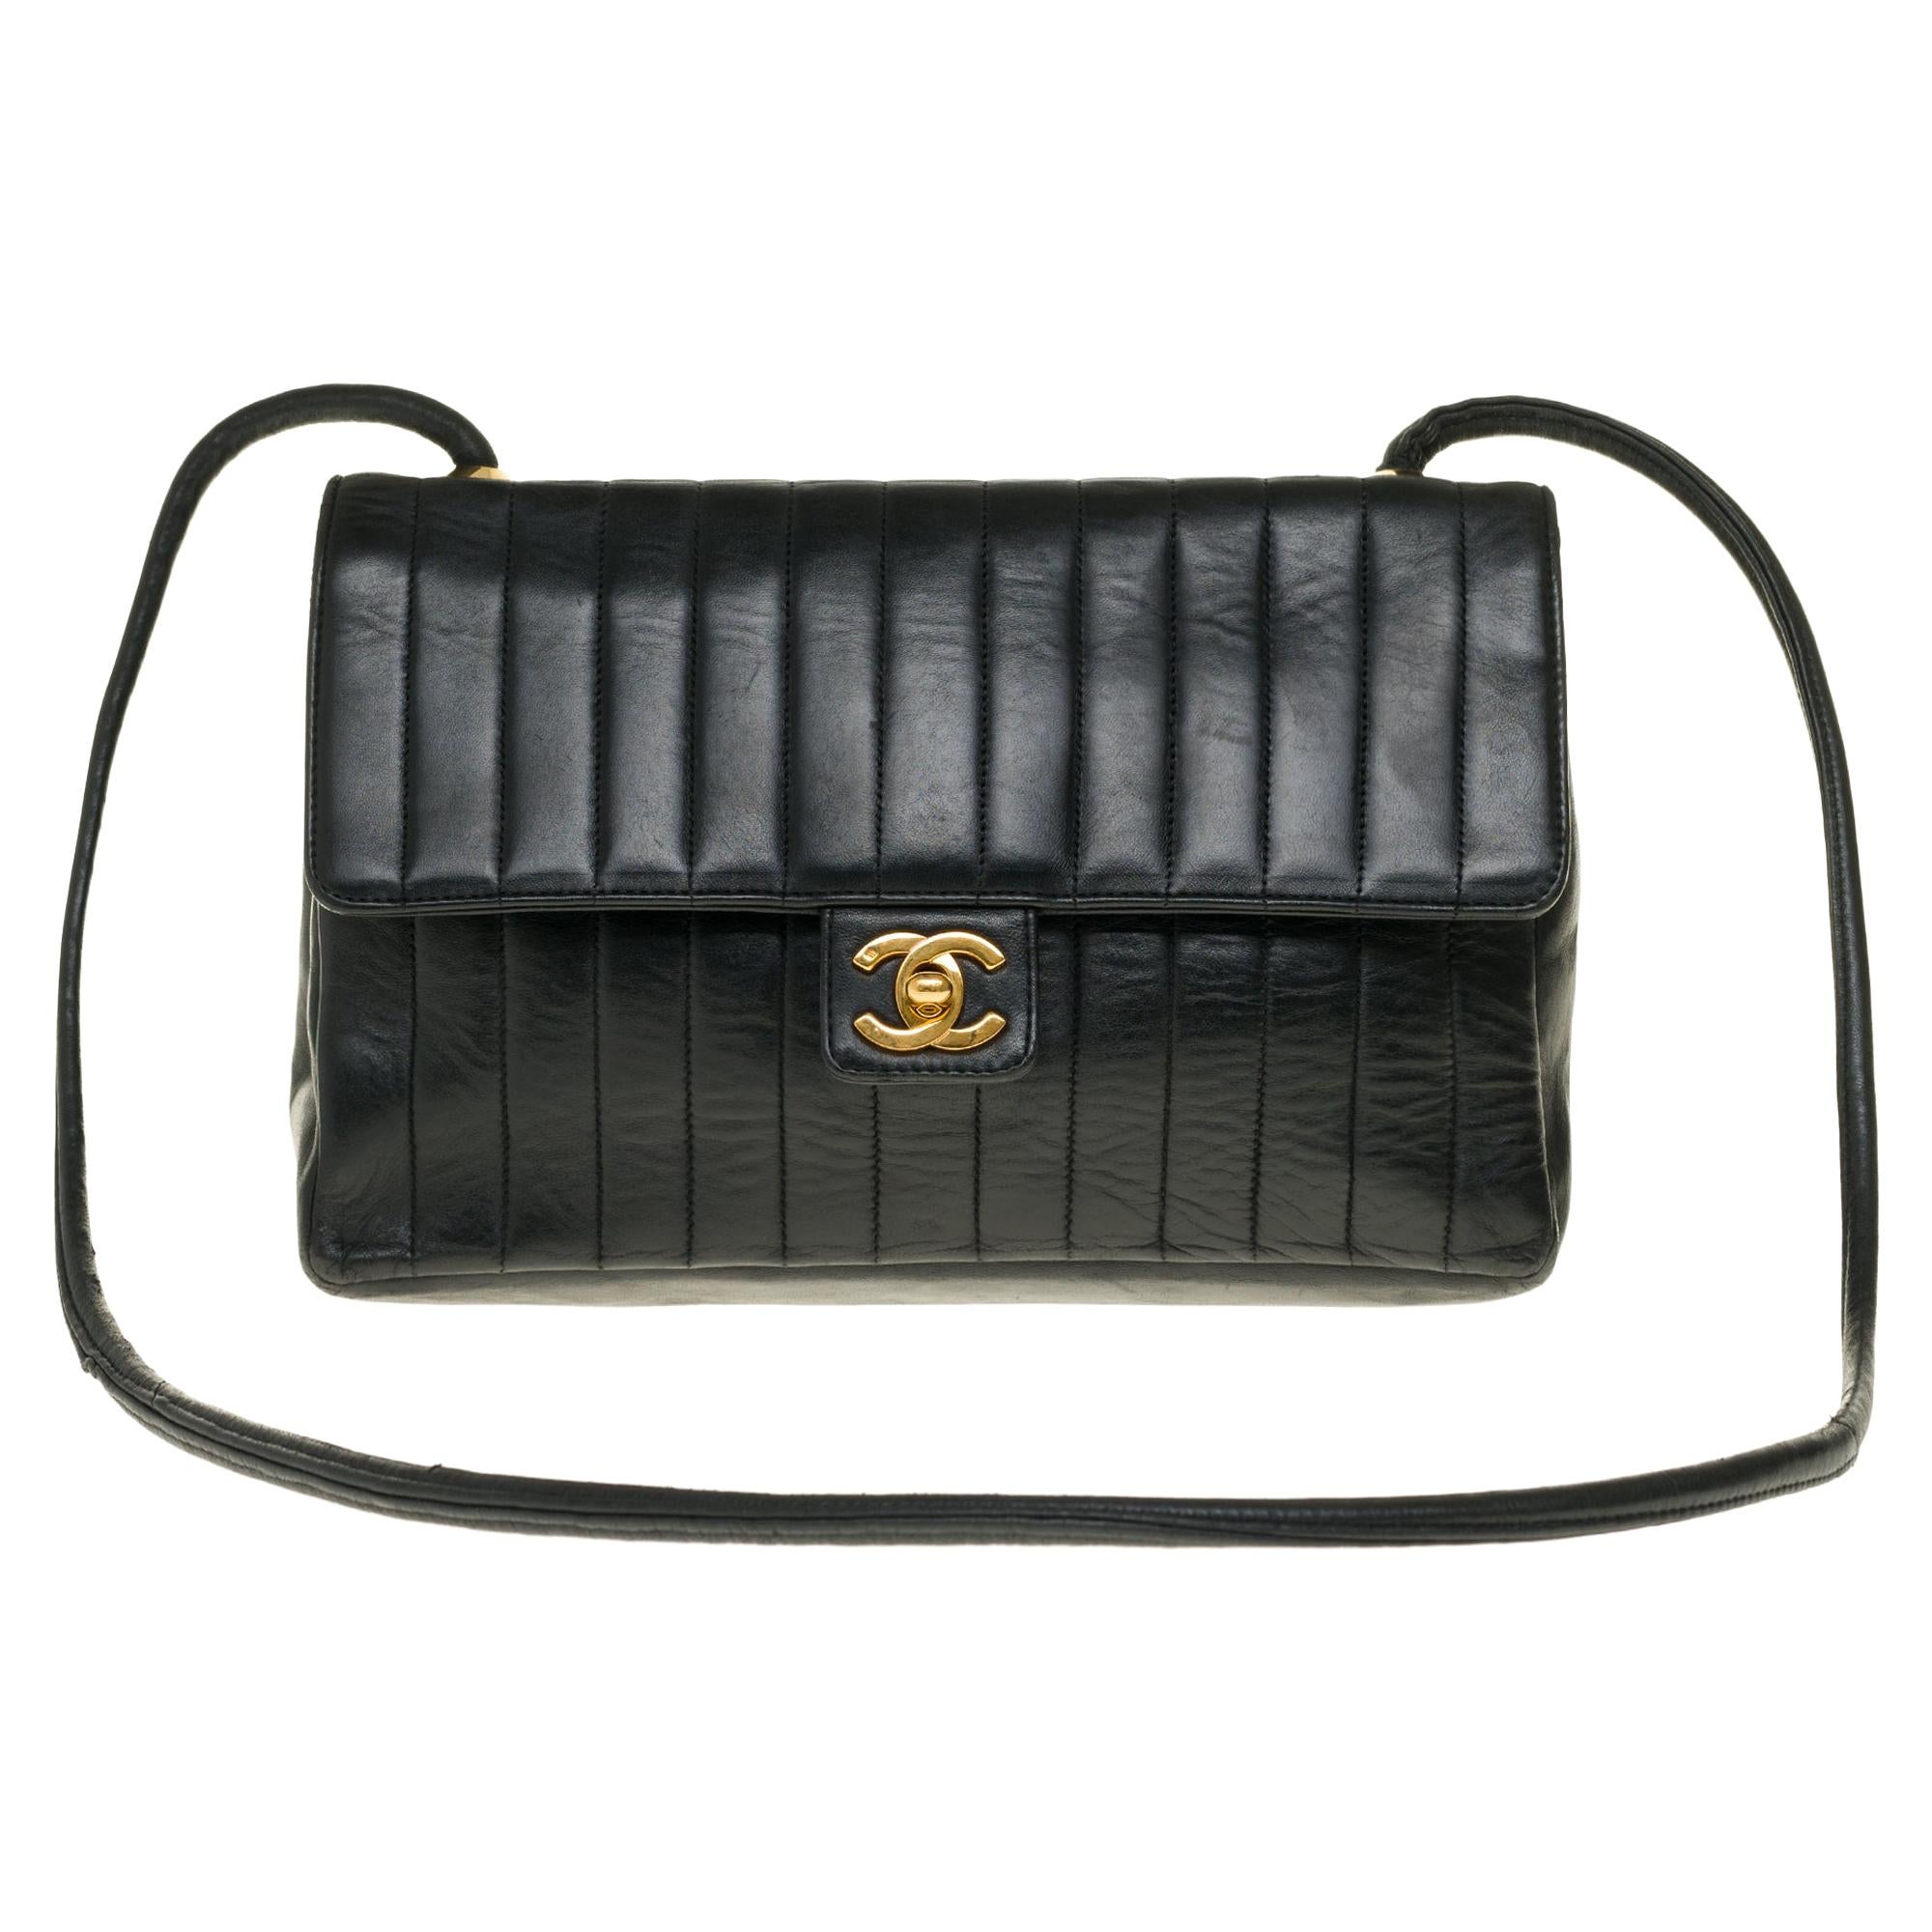 Chanel Classic shoulder bag in chevron black quilted lambskin with gold hardware